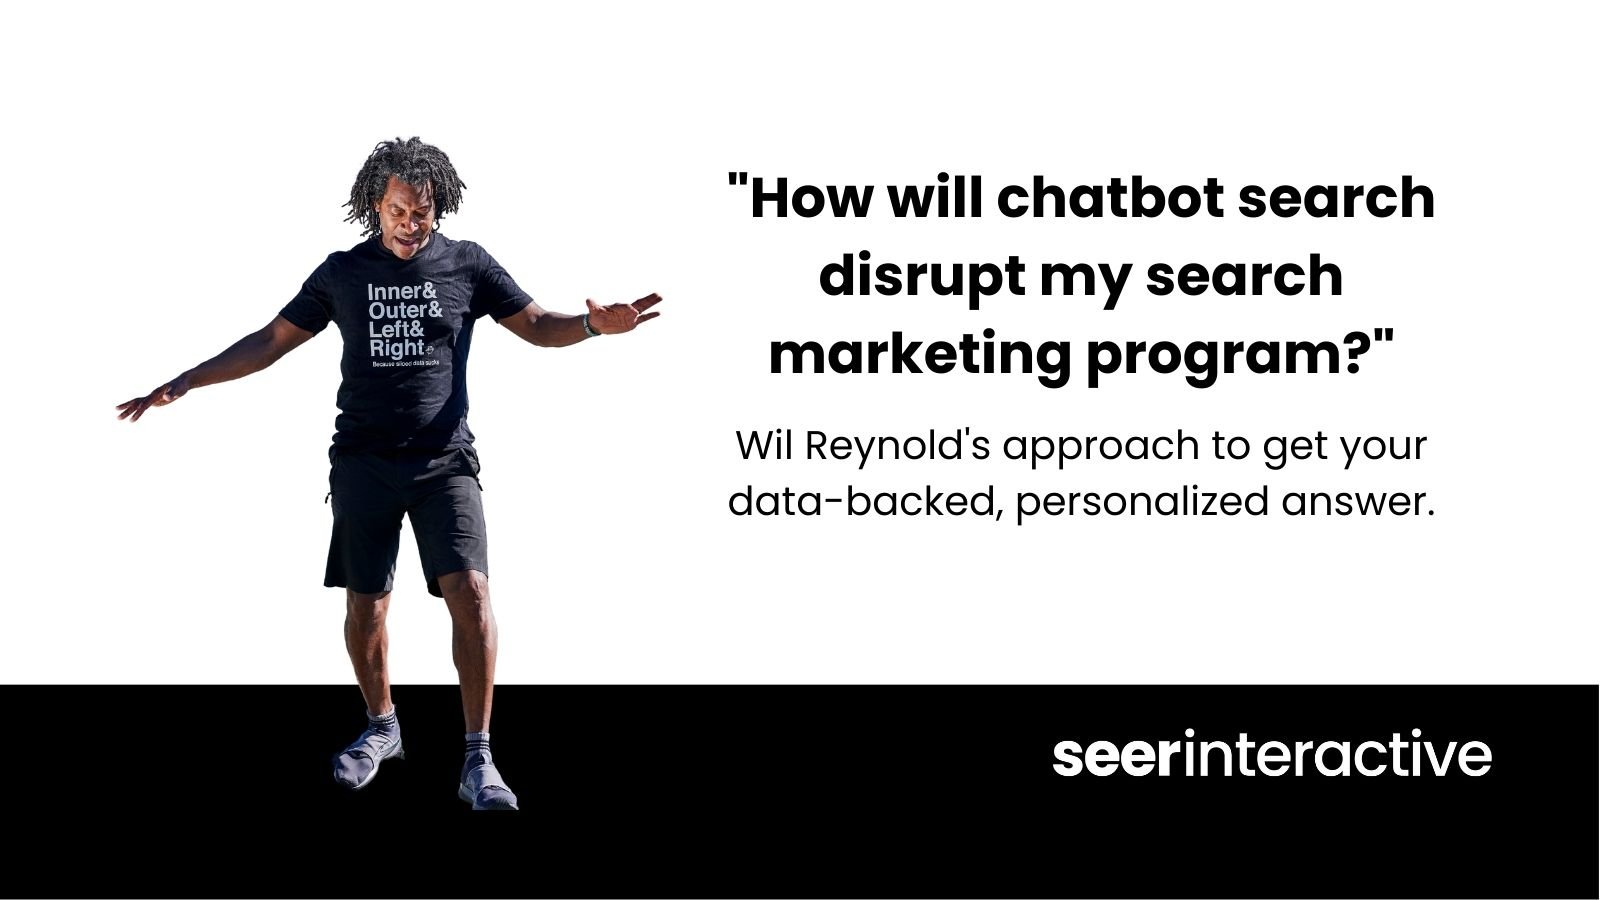 Search Powered by Chatbots will Impact Your Search Strategy, You Ready?